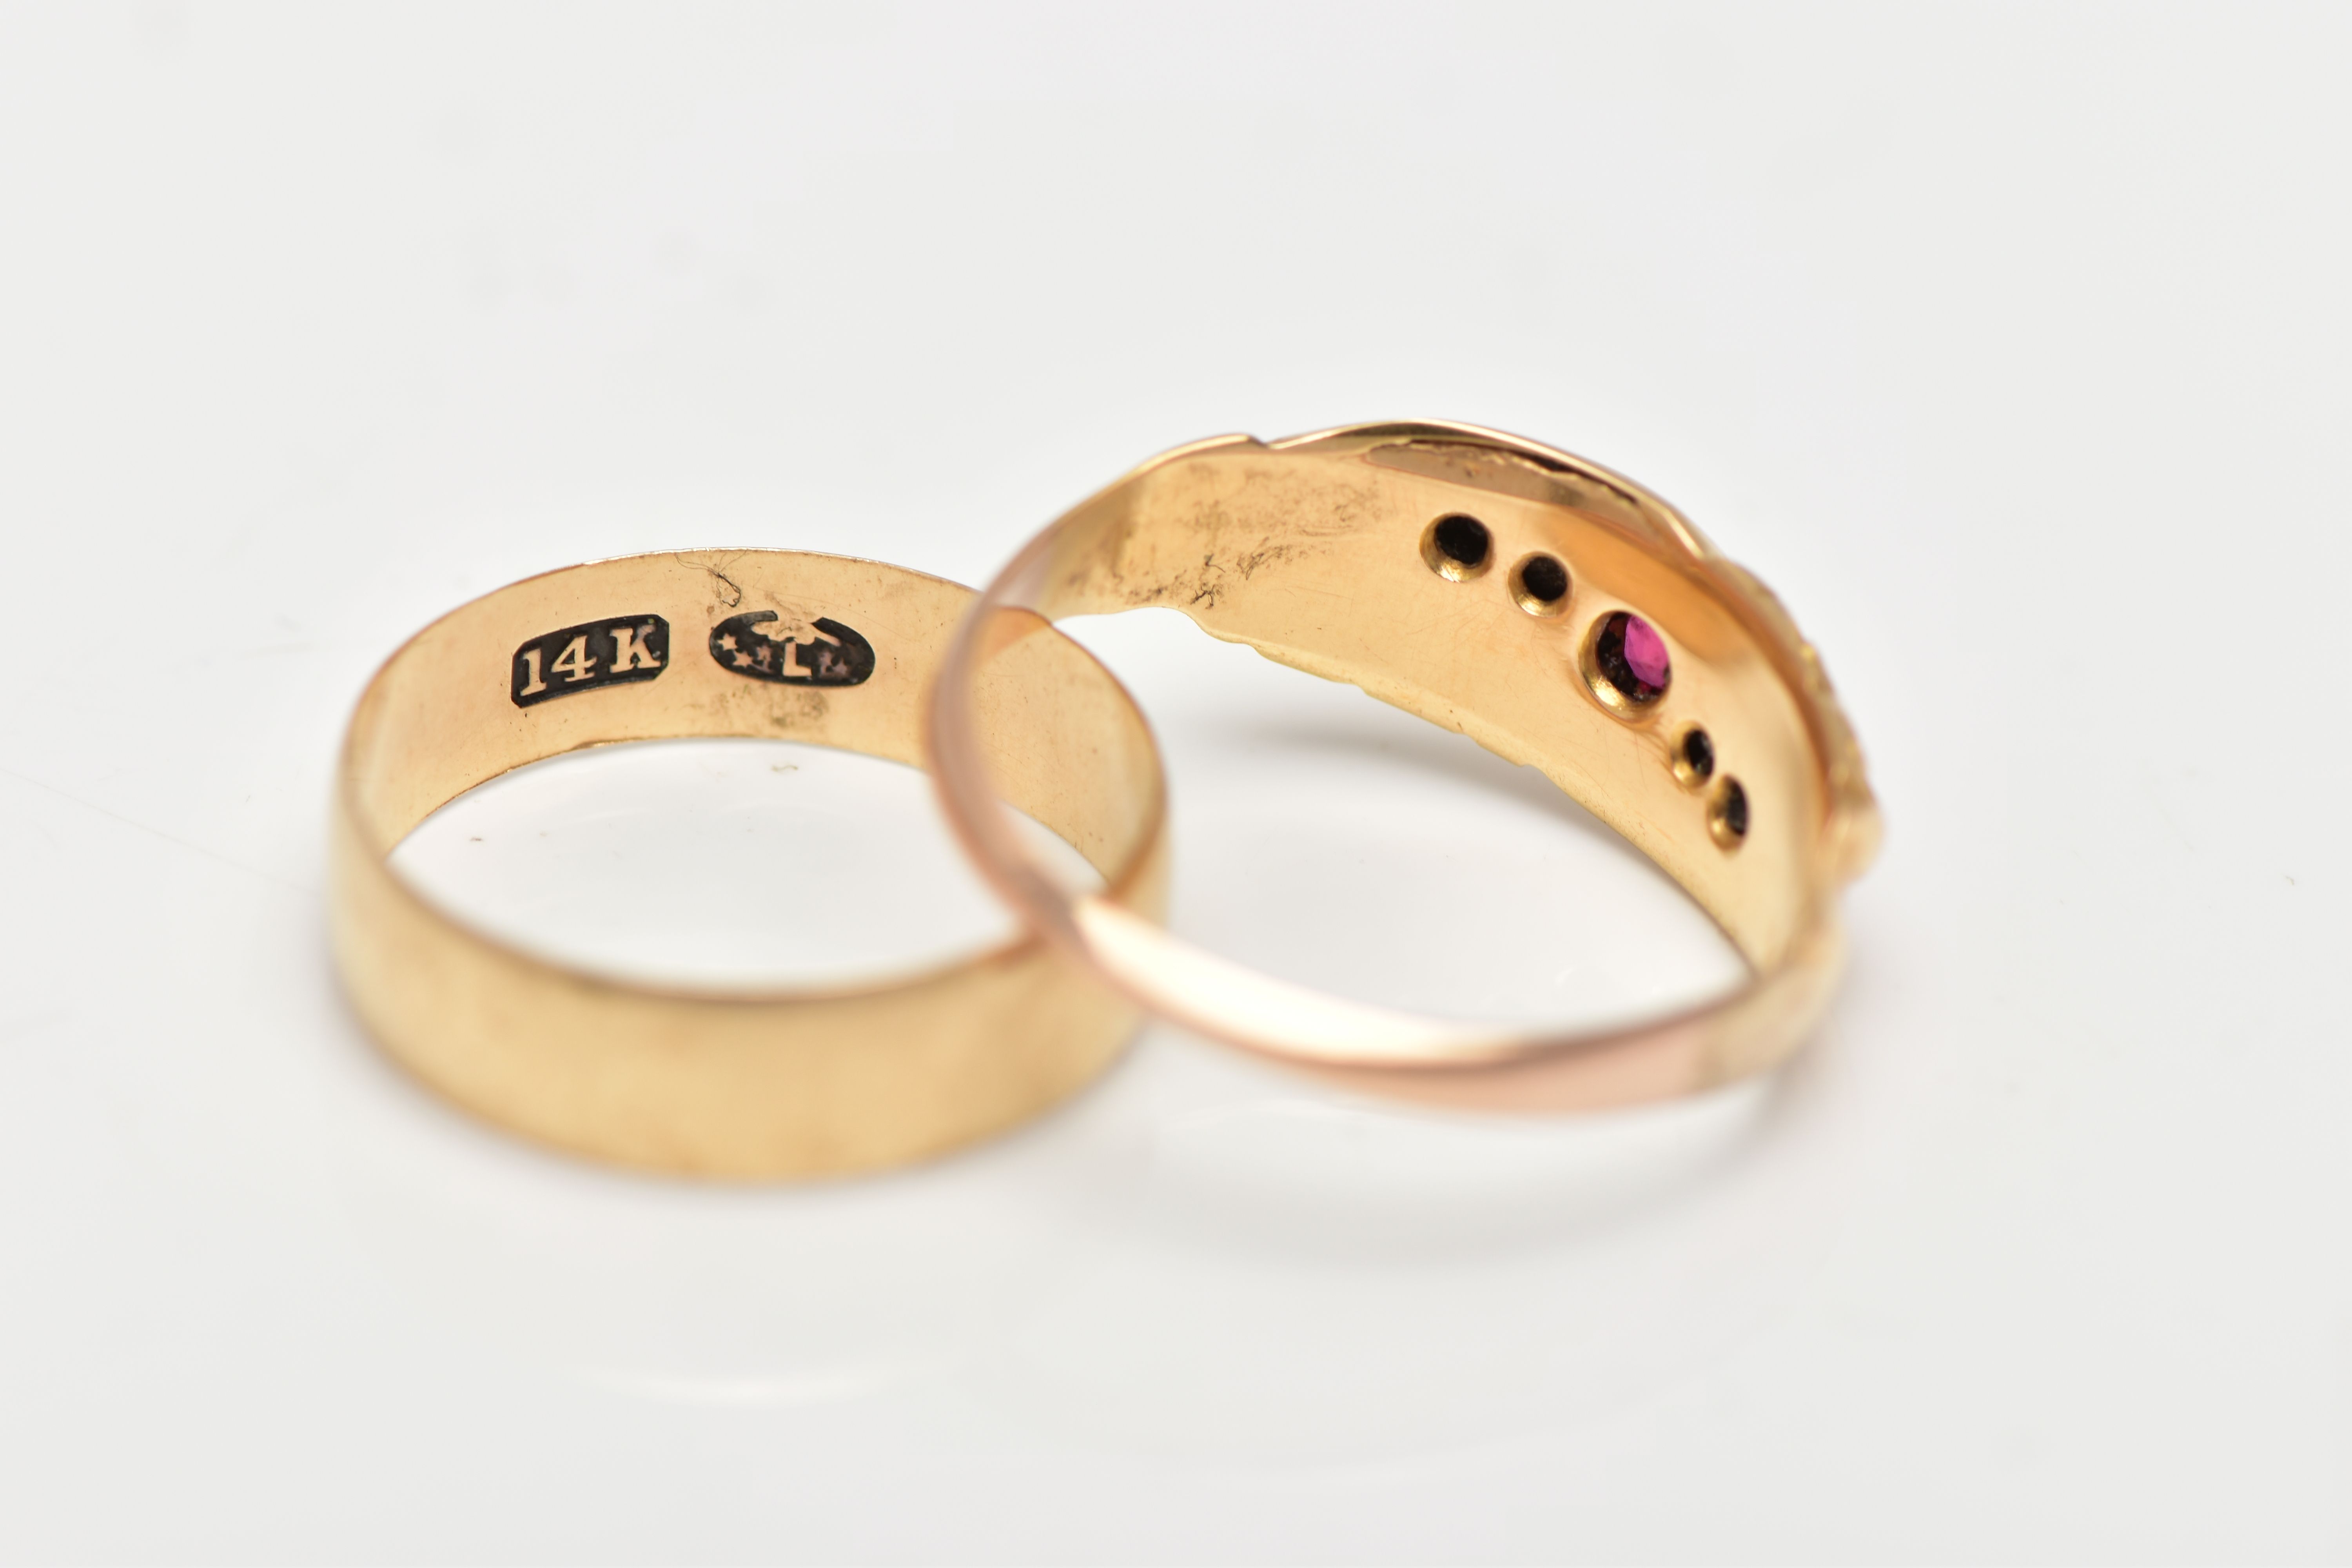 TWO EARLY 20TH CENTURY GOLD RINGS, the first a plain polished yellow gold band ring, approximate - Image 3 of 3